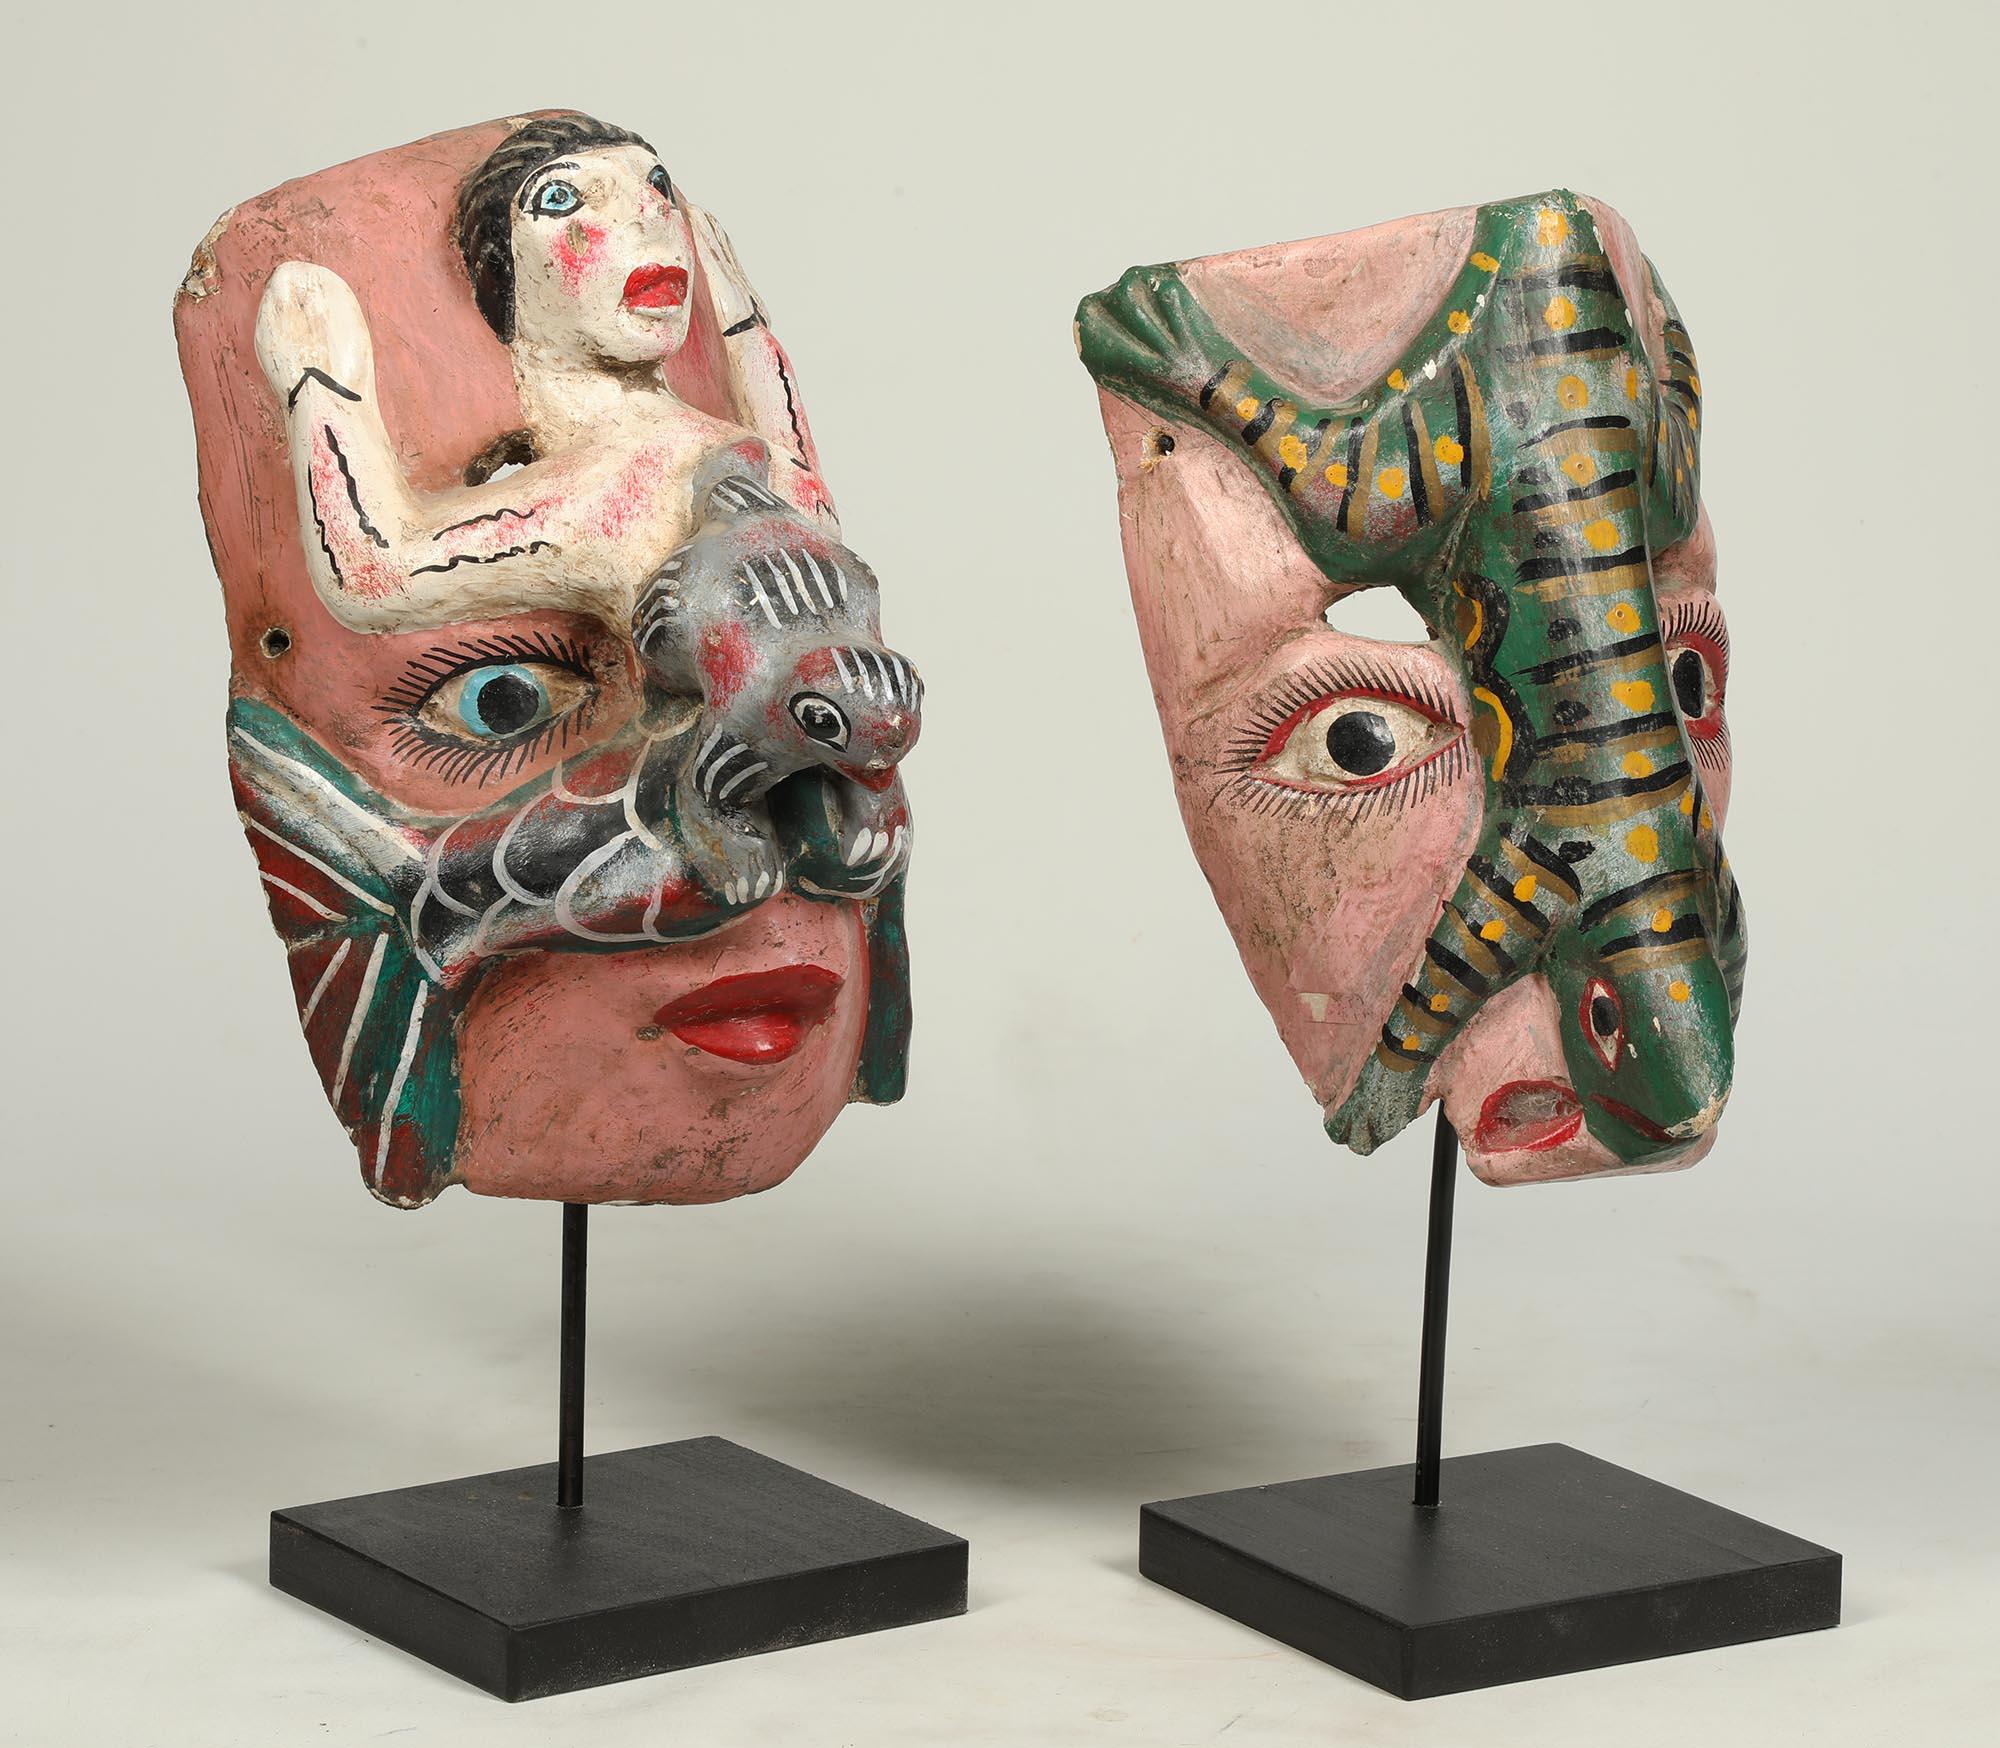 Group of two polychrome painted wood mid-20th century Mexican dance masks.  Each with a face one with a lizard on top and the other with a mermaid.  Some chips, wear and darkening of inside.
Mermaid mask is 10.5 inches high, on custom wood base,